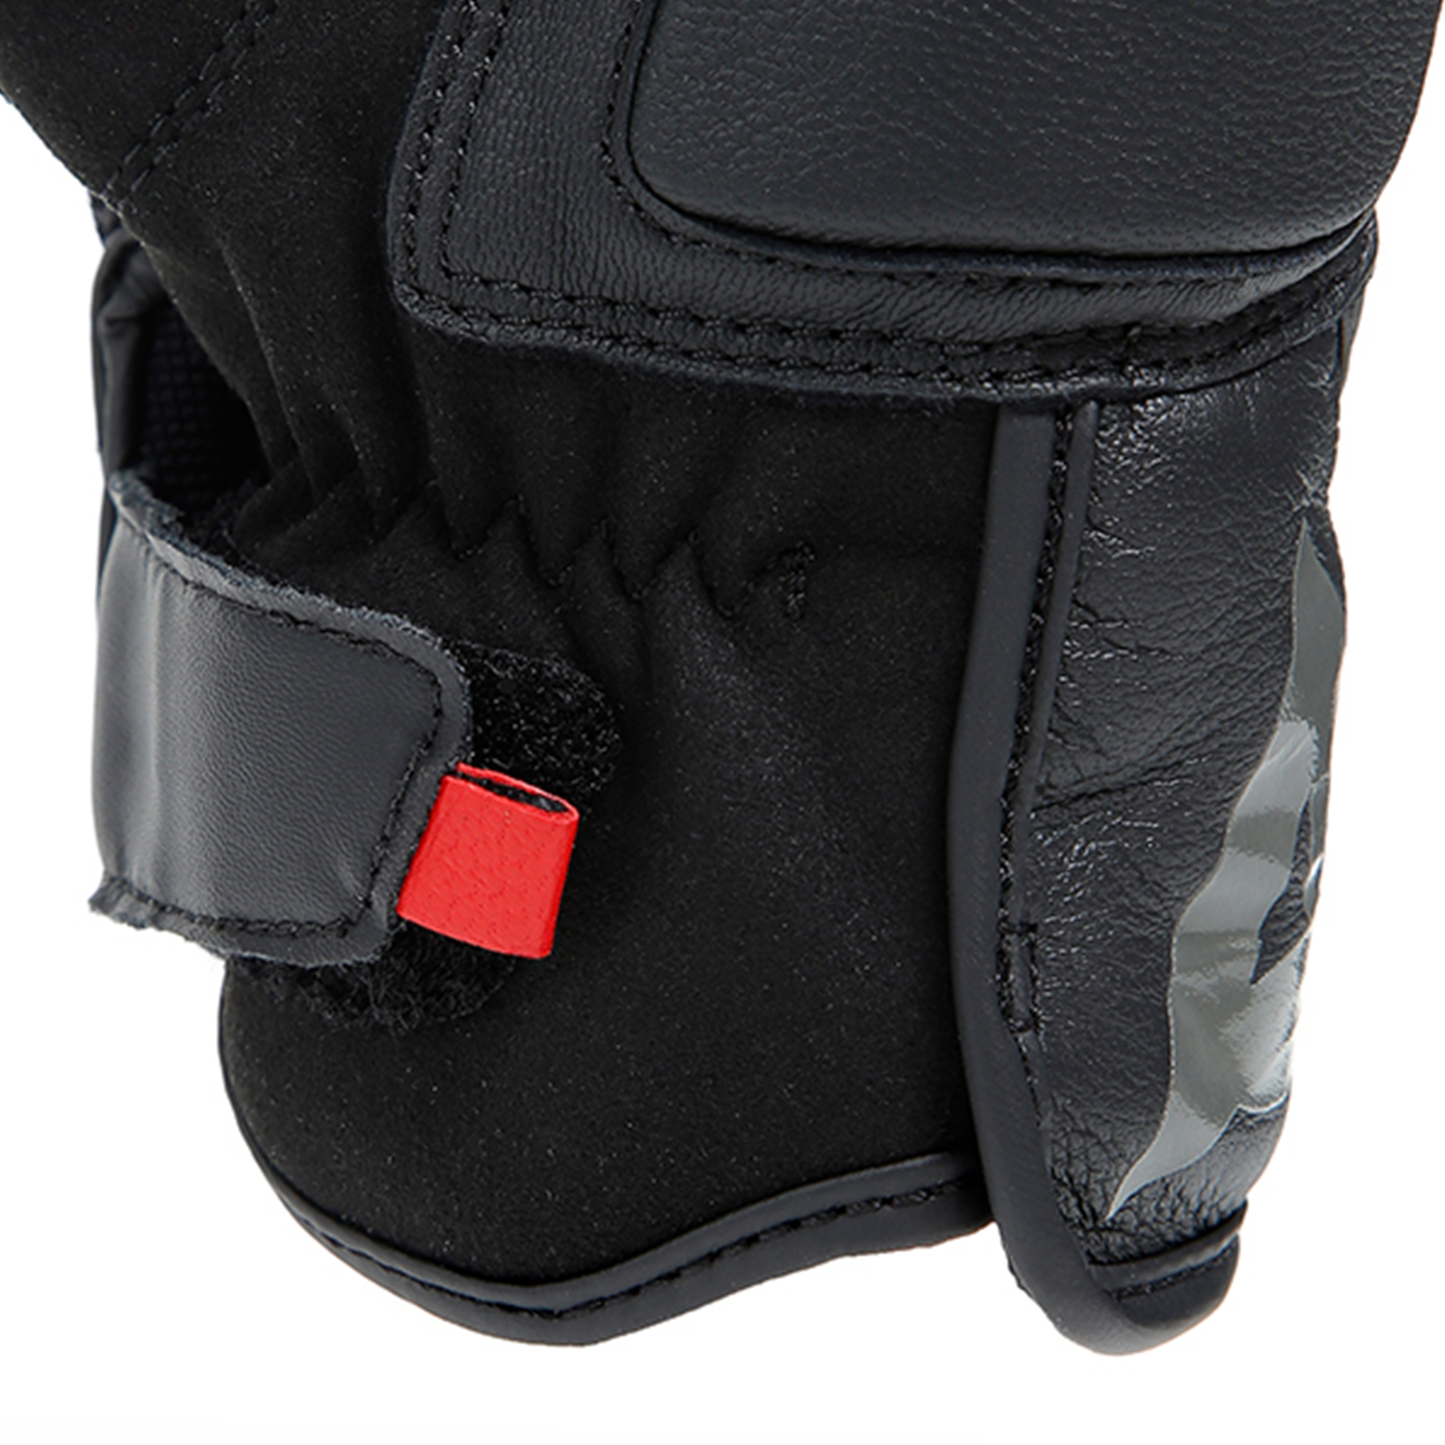 Dainese Mig 3 Leather Motorcycle Gloves - Black